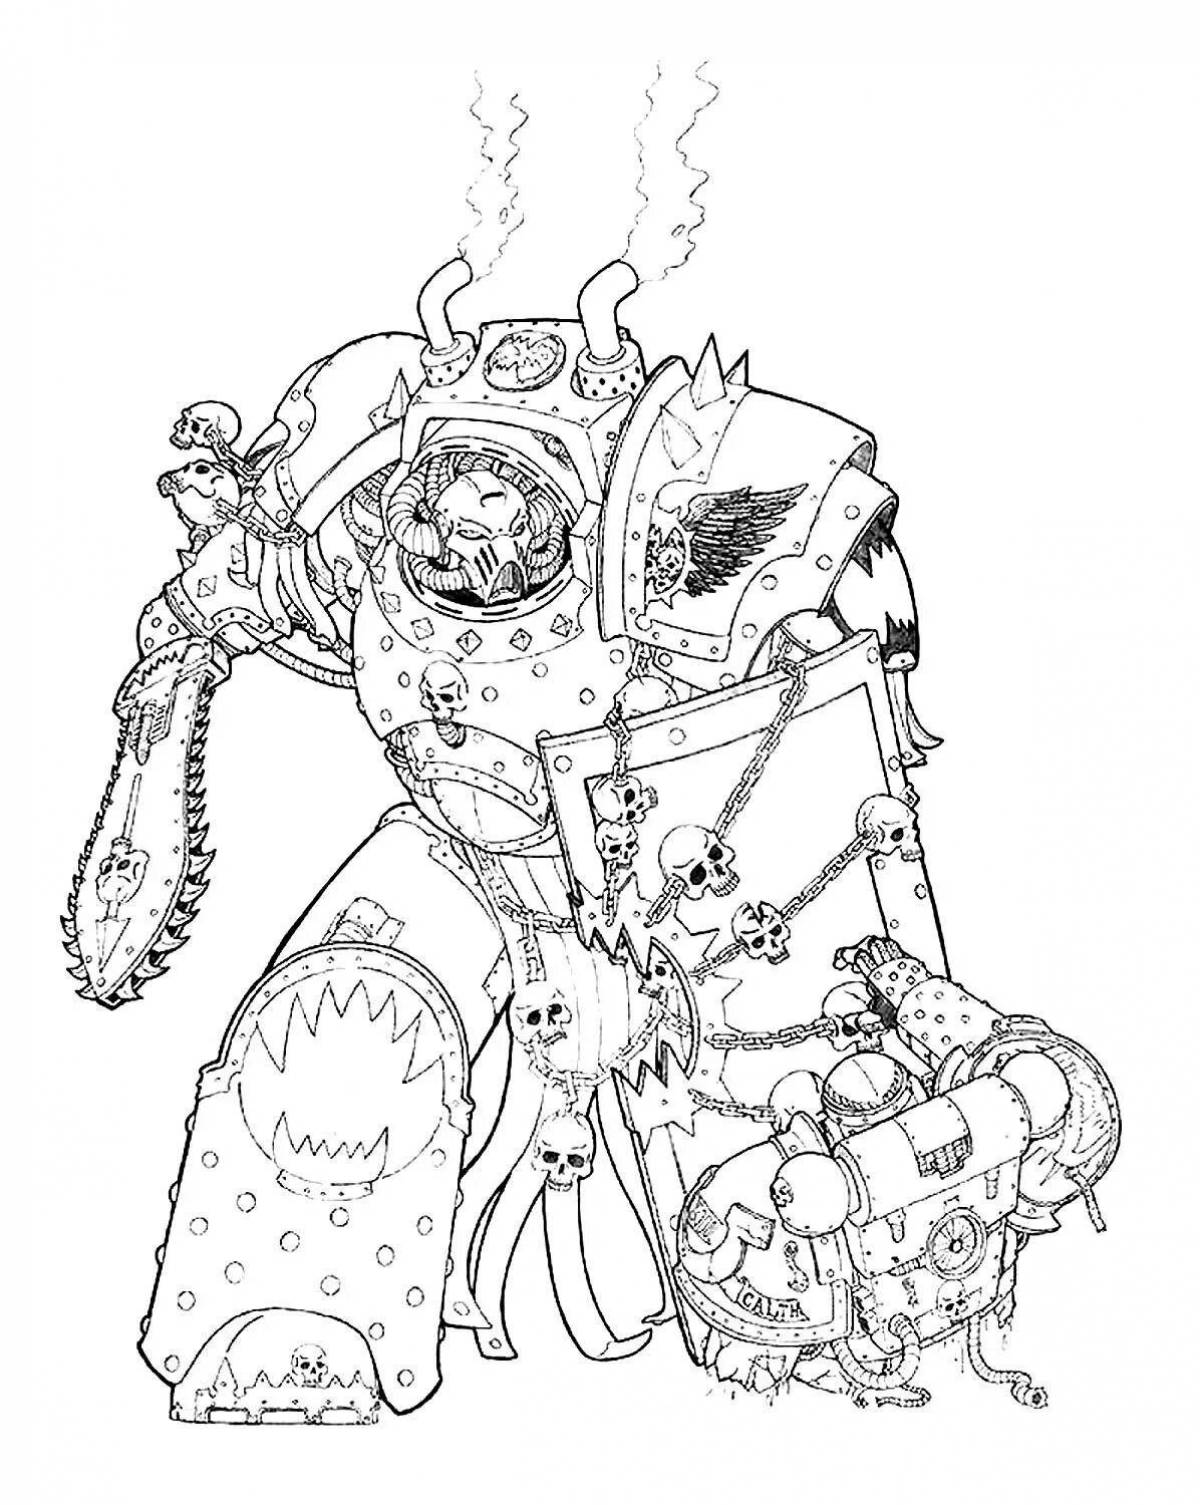 Great warhammer 40000 coloring book